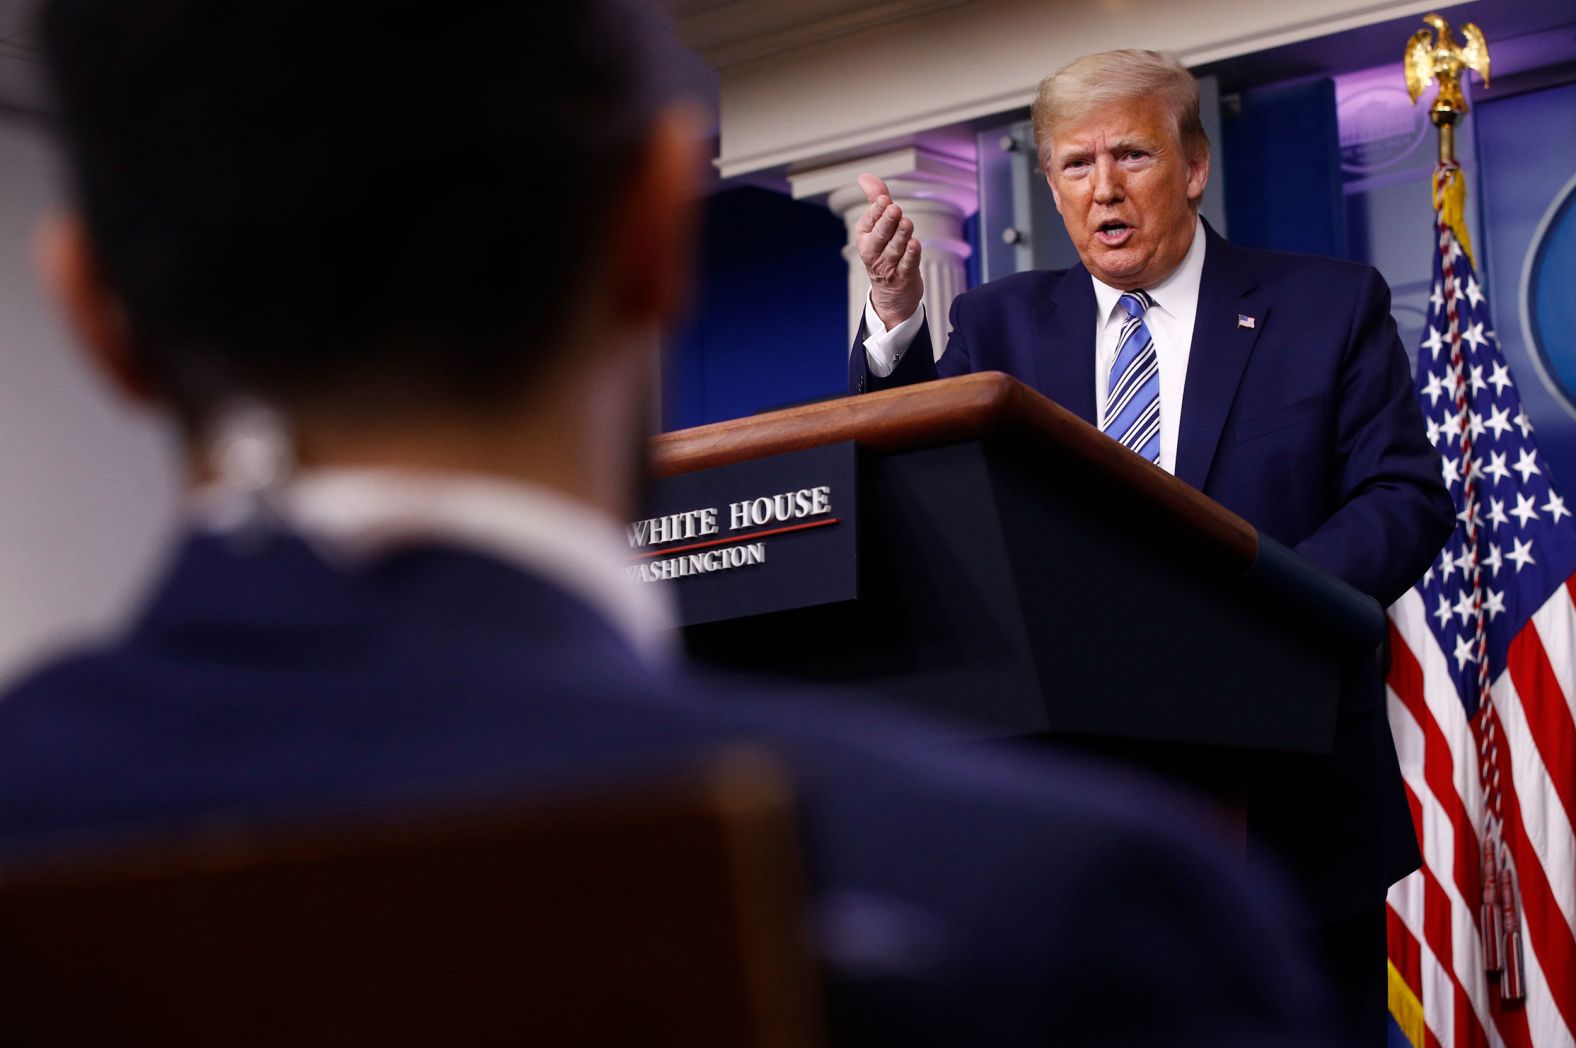 Trump responds to a question from CNN's Jeremy Diamond during the White House coronavirus briefing on April 19. When pressed by Diamond as to why he was taking time during briefing to<a href="https://www.cnn.com/world/live-news/coronavirus-pandemic-04-19-20-intl/h_518ef7f7b57941c3ce031ad63ff129ac" target="_blank"> discuss praise he has received</a> while millions of Americans were unemployed and tens of thousands had died, Trump said he was "standing up for the men and women who have done such an incredible job," not for himself. "It's not about me. Nothing is about me," he said. The clips Trump played at the briefing praised himself and not health-care workers.